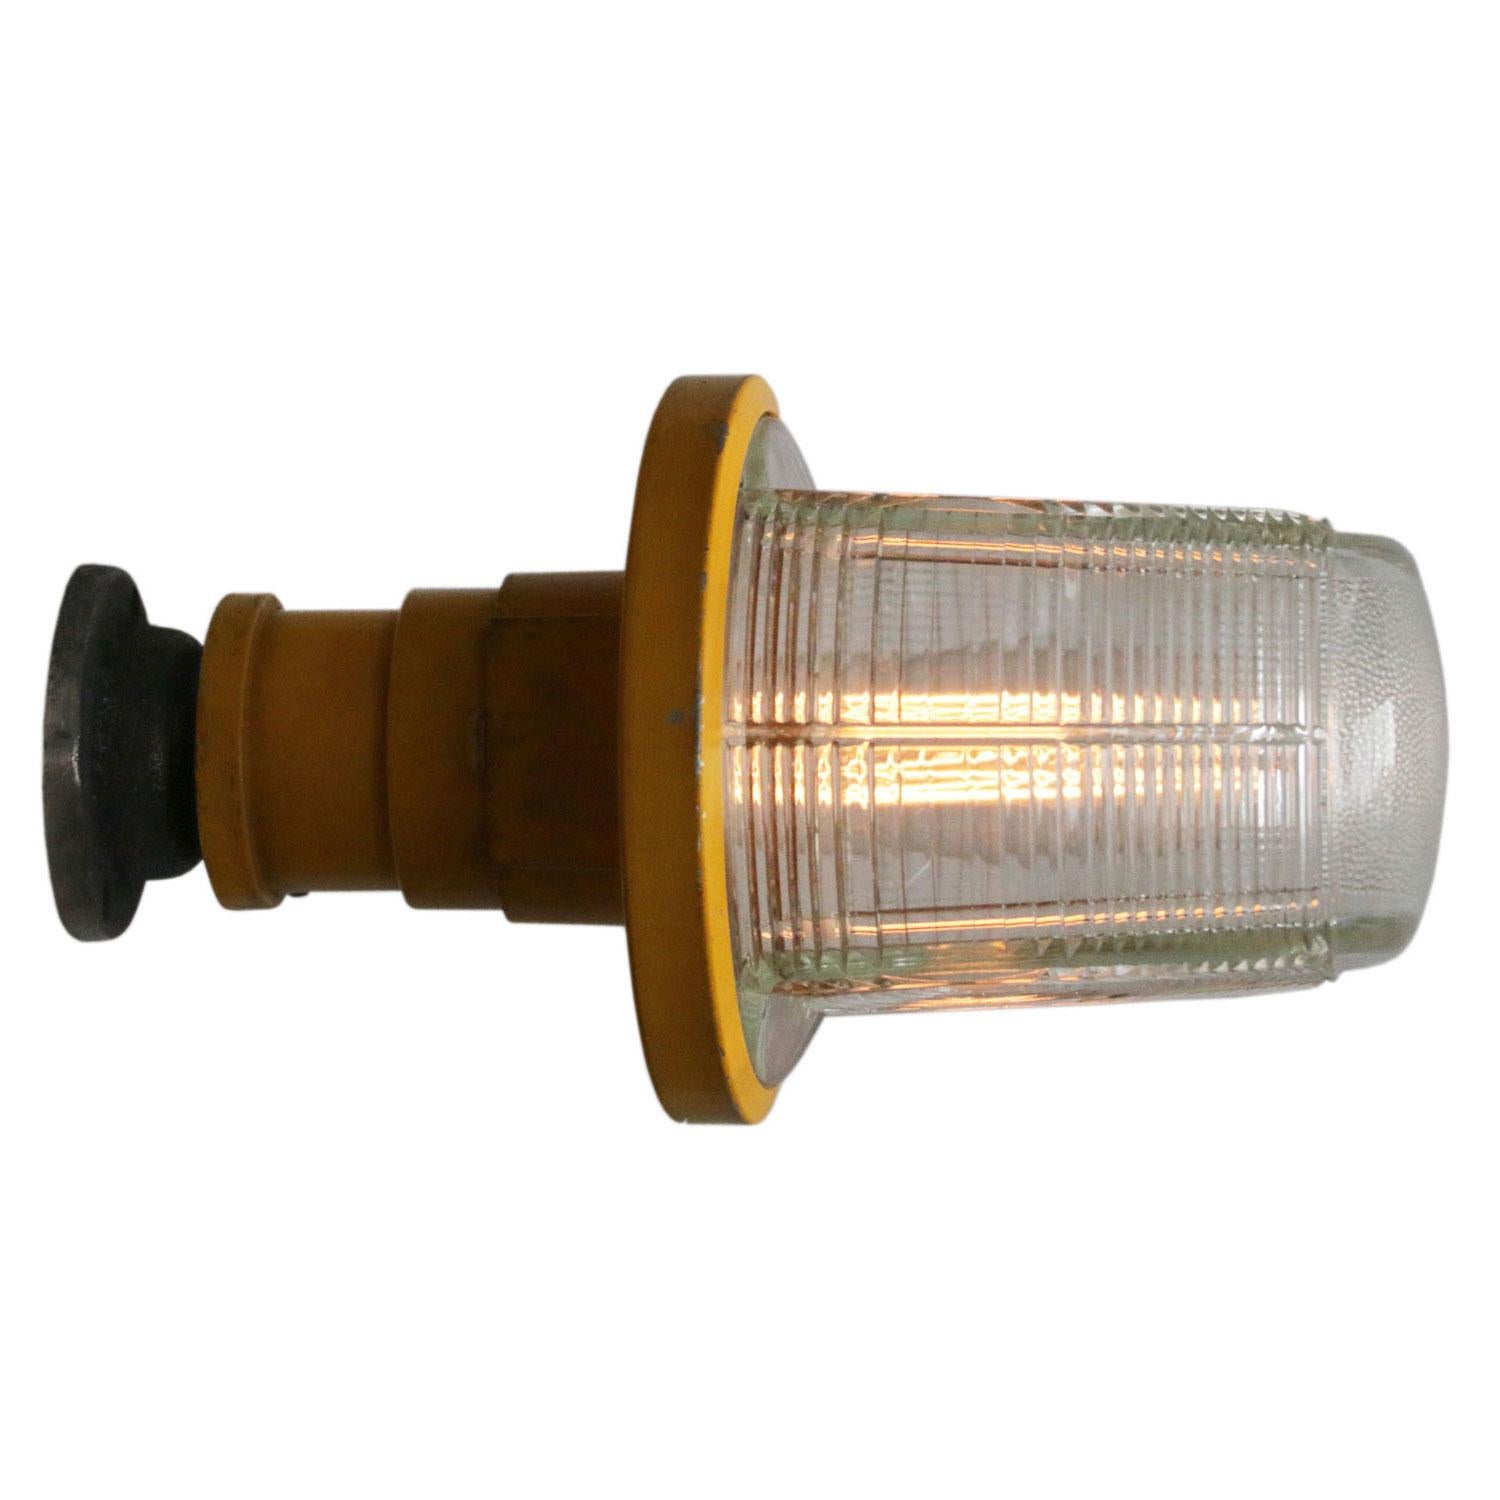 Runway light Airport Twente. Clear striped glass

Weight: 4.9 kg / 10.8 lb

Priced per individual item. All lamps have been made suitable by international standards for incandescent light bulbs, energy-efficient and LED bulbs. E26/E27 bulb holders